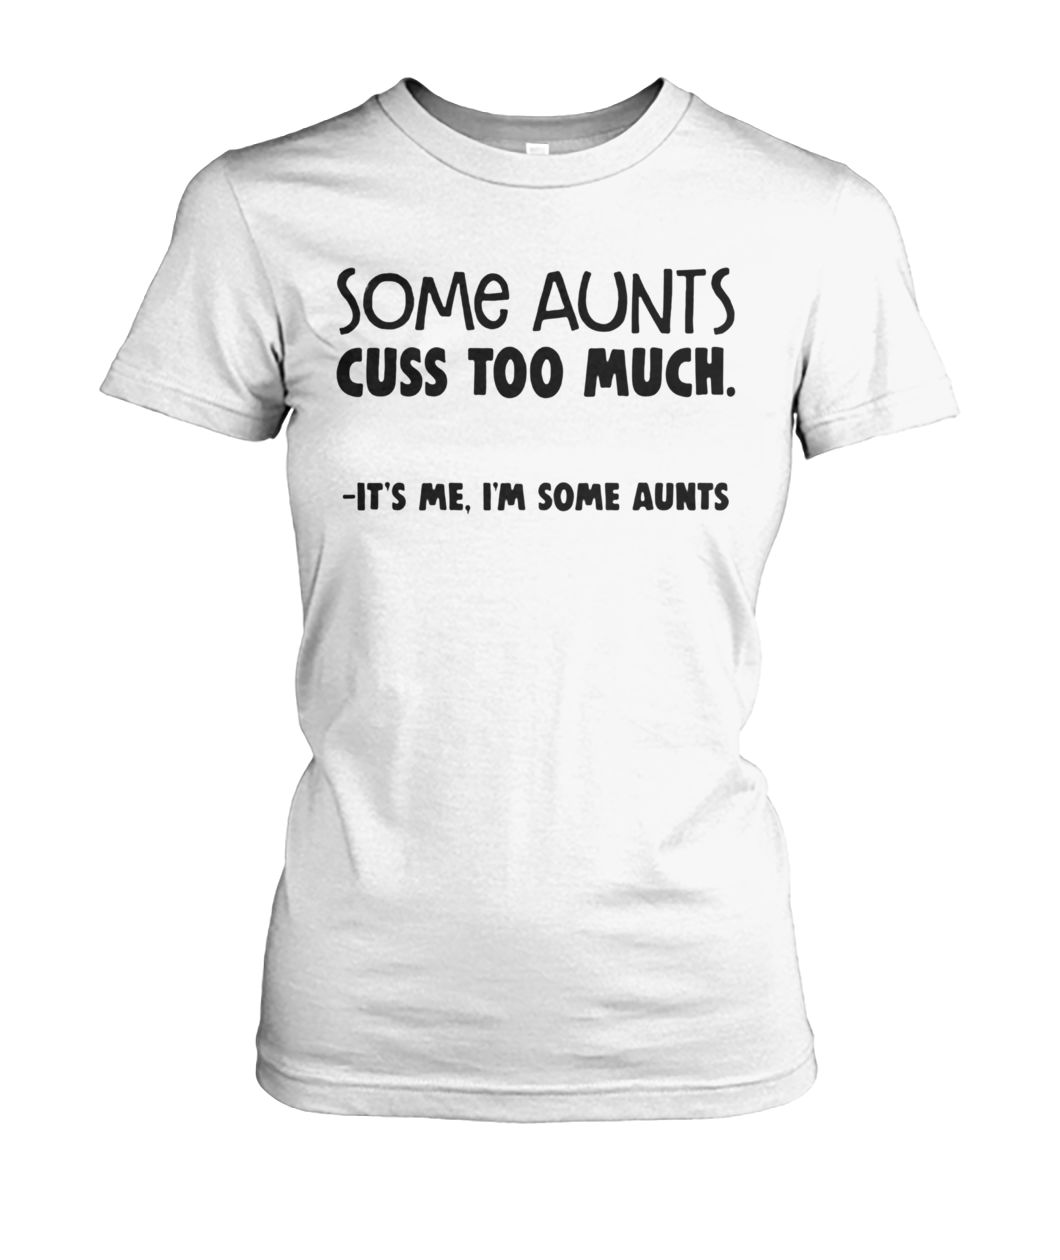 Some aunts cuss too much it's me I'm some aunts women's crew tee